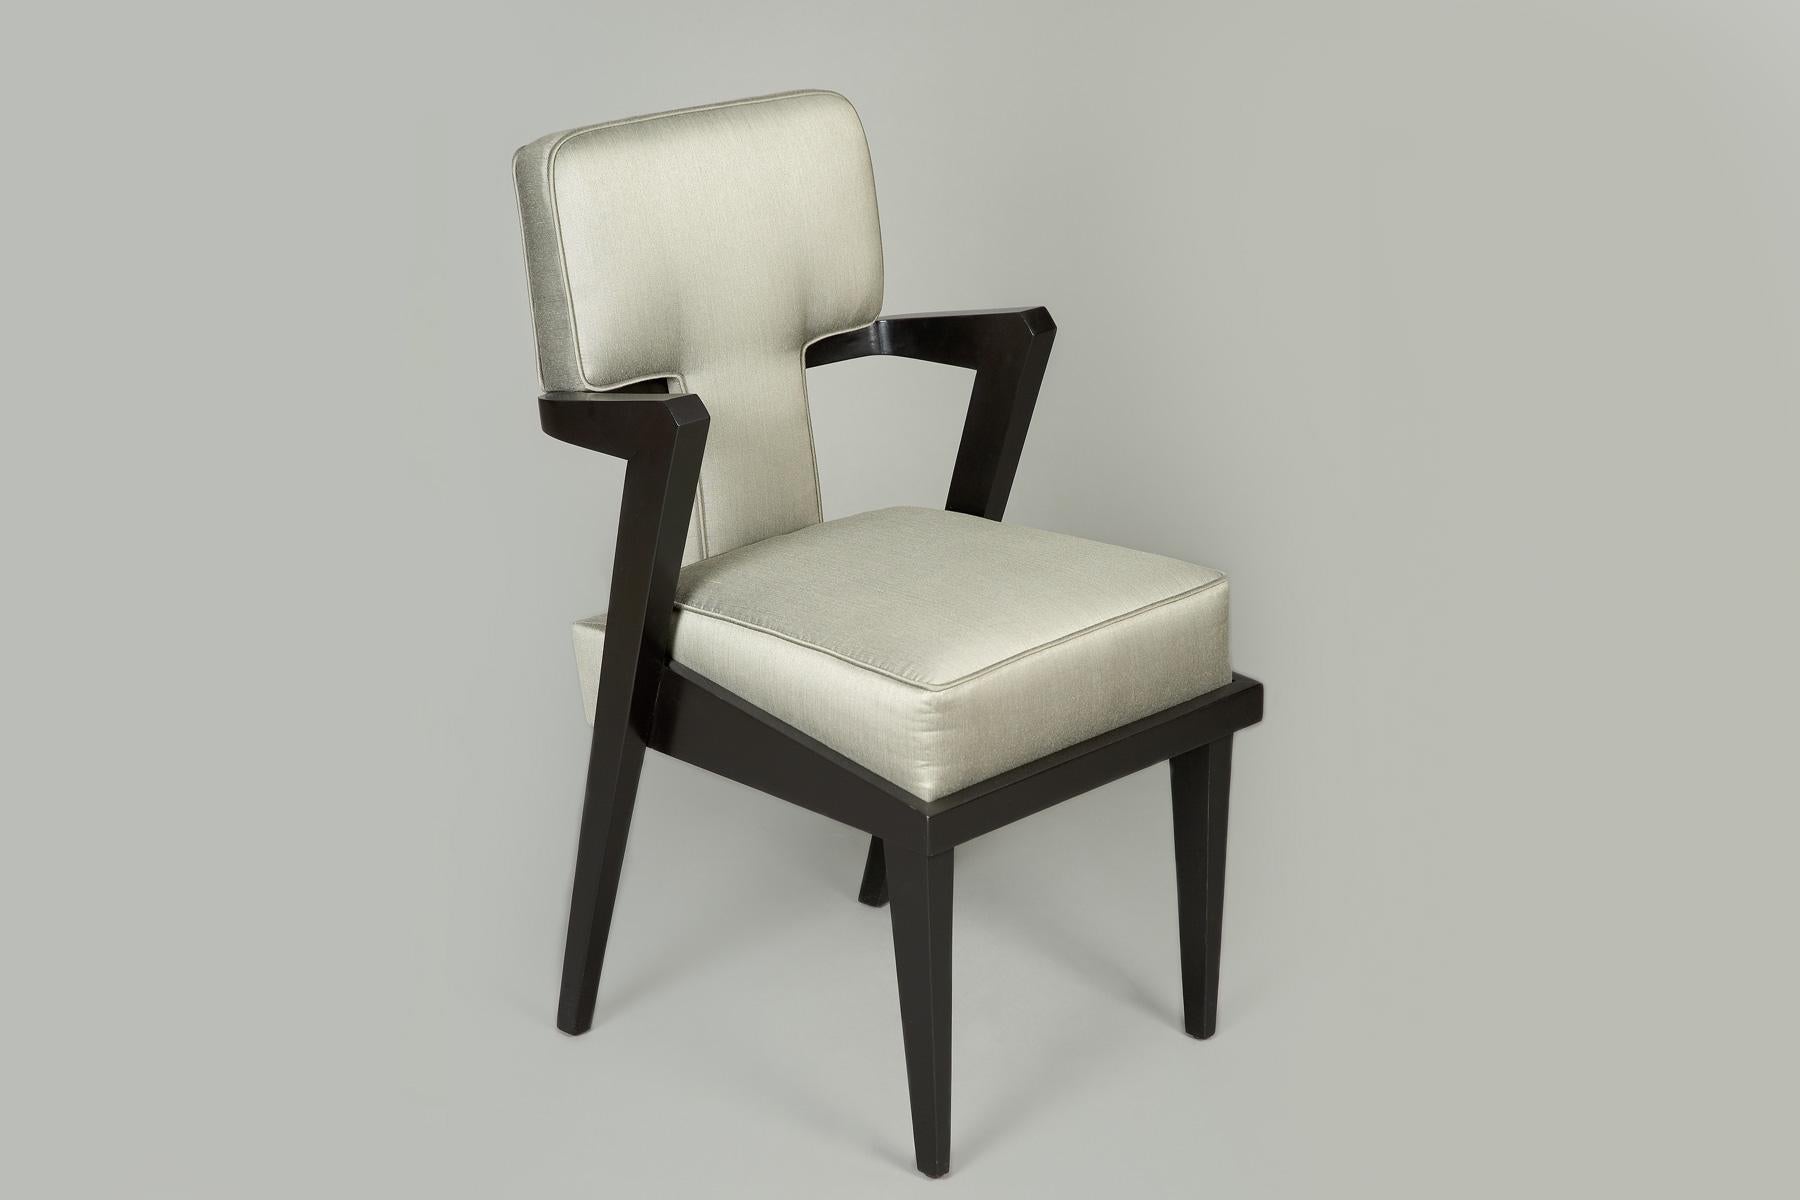 Wood Frame Arm Chair with wrap around upholstery.